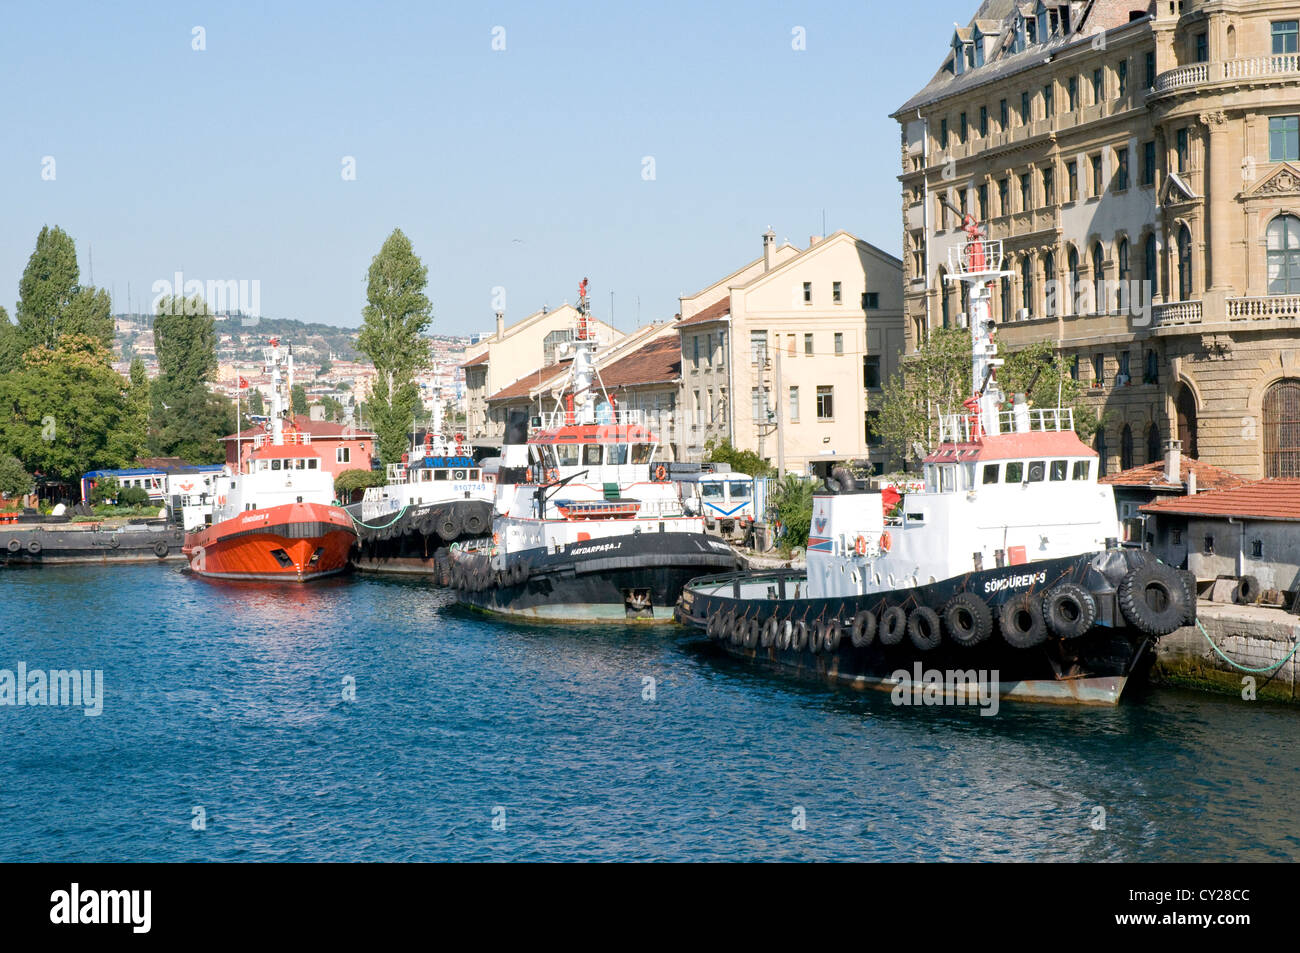 Tugboats at the port of Kadikoy (Kadıköy), on the Sea of Marmara and the Asian side of the Golden Horn, in the city of Istanbul, Turkey. Stock Photo